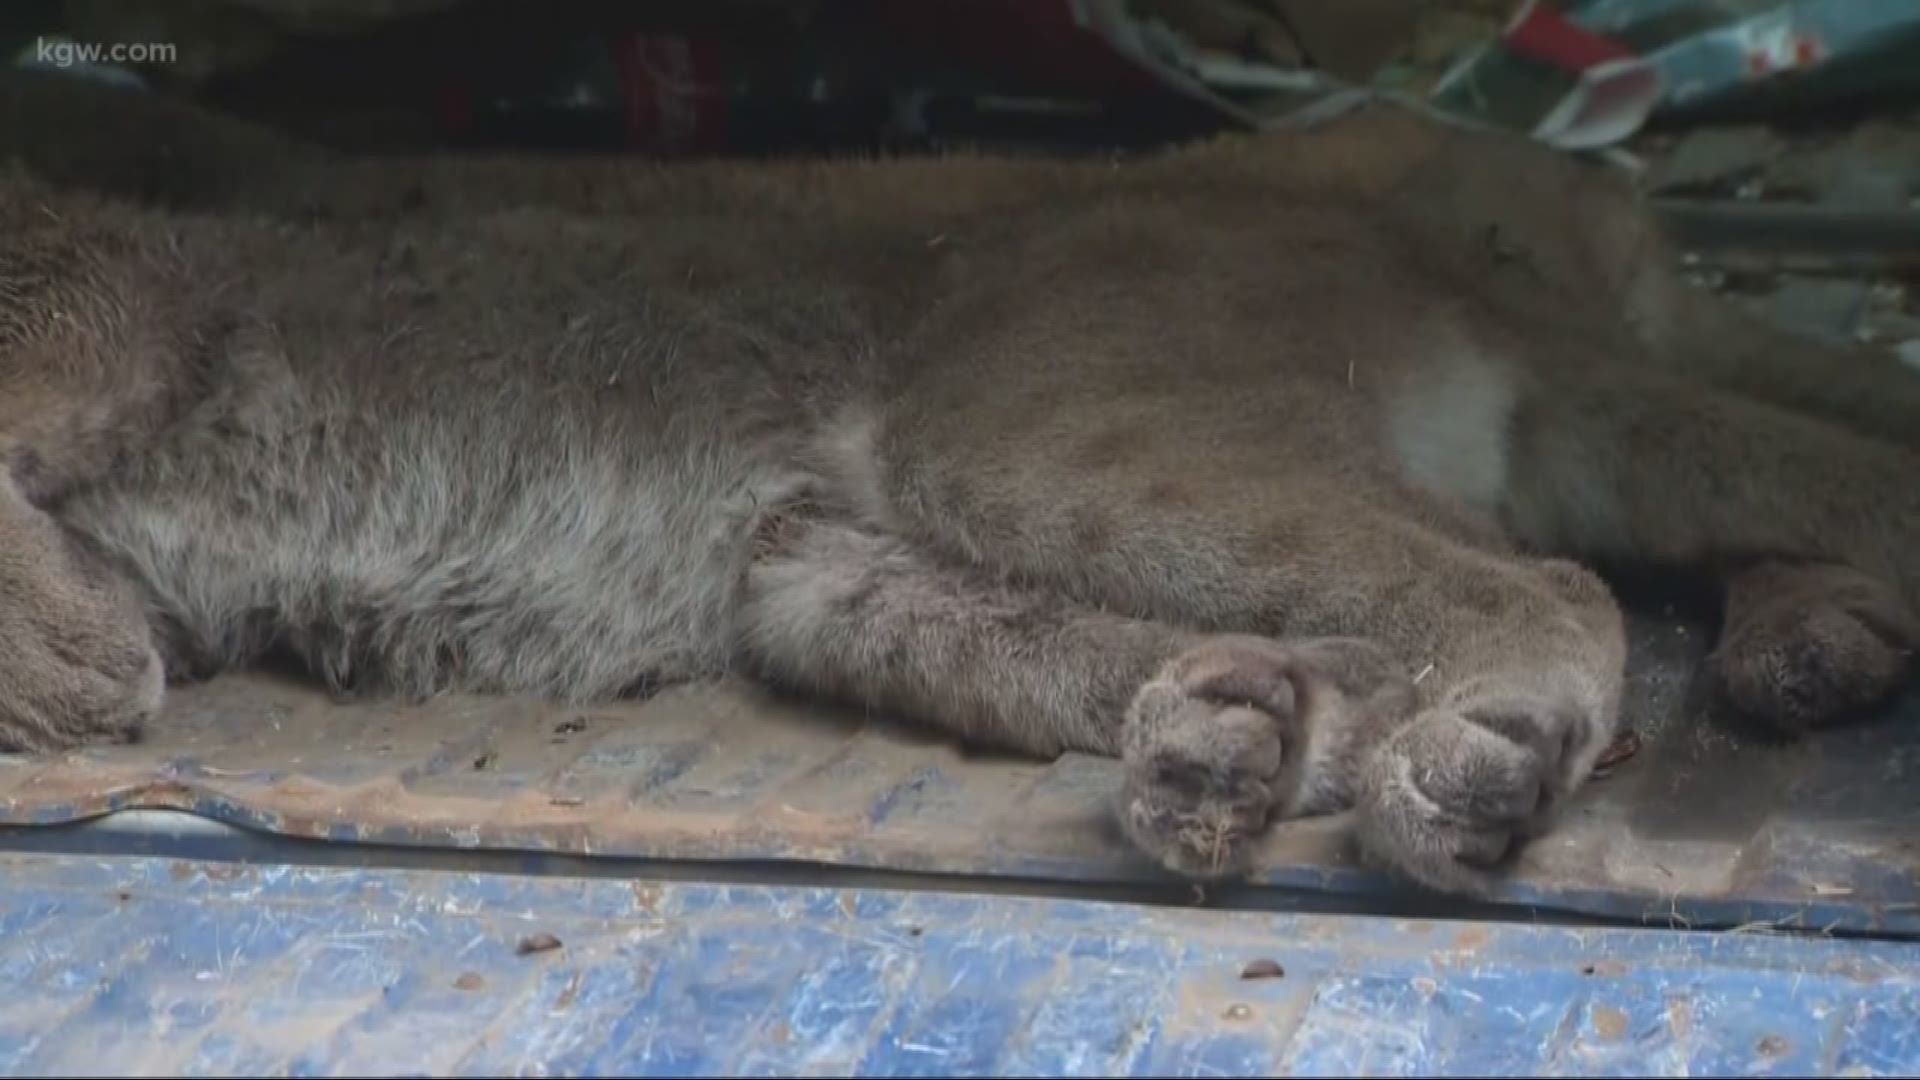 A Corbett man shot two cougars, one of which hissed and stared at him.